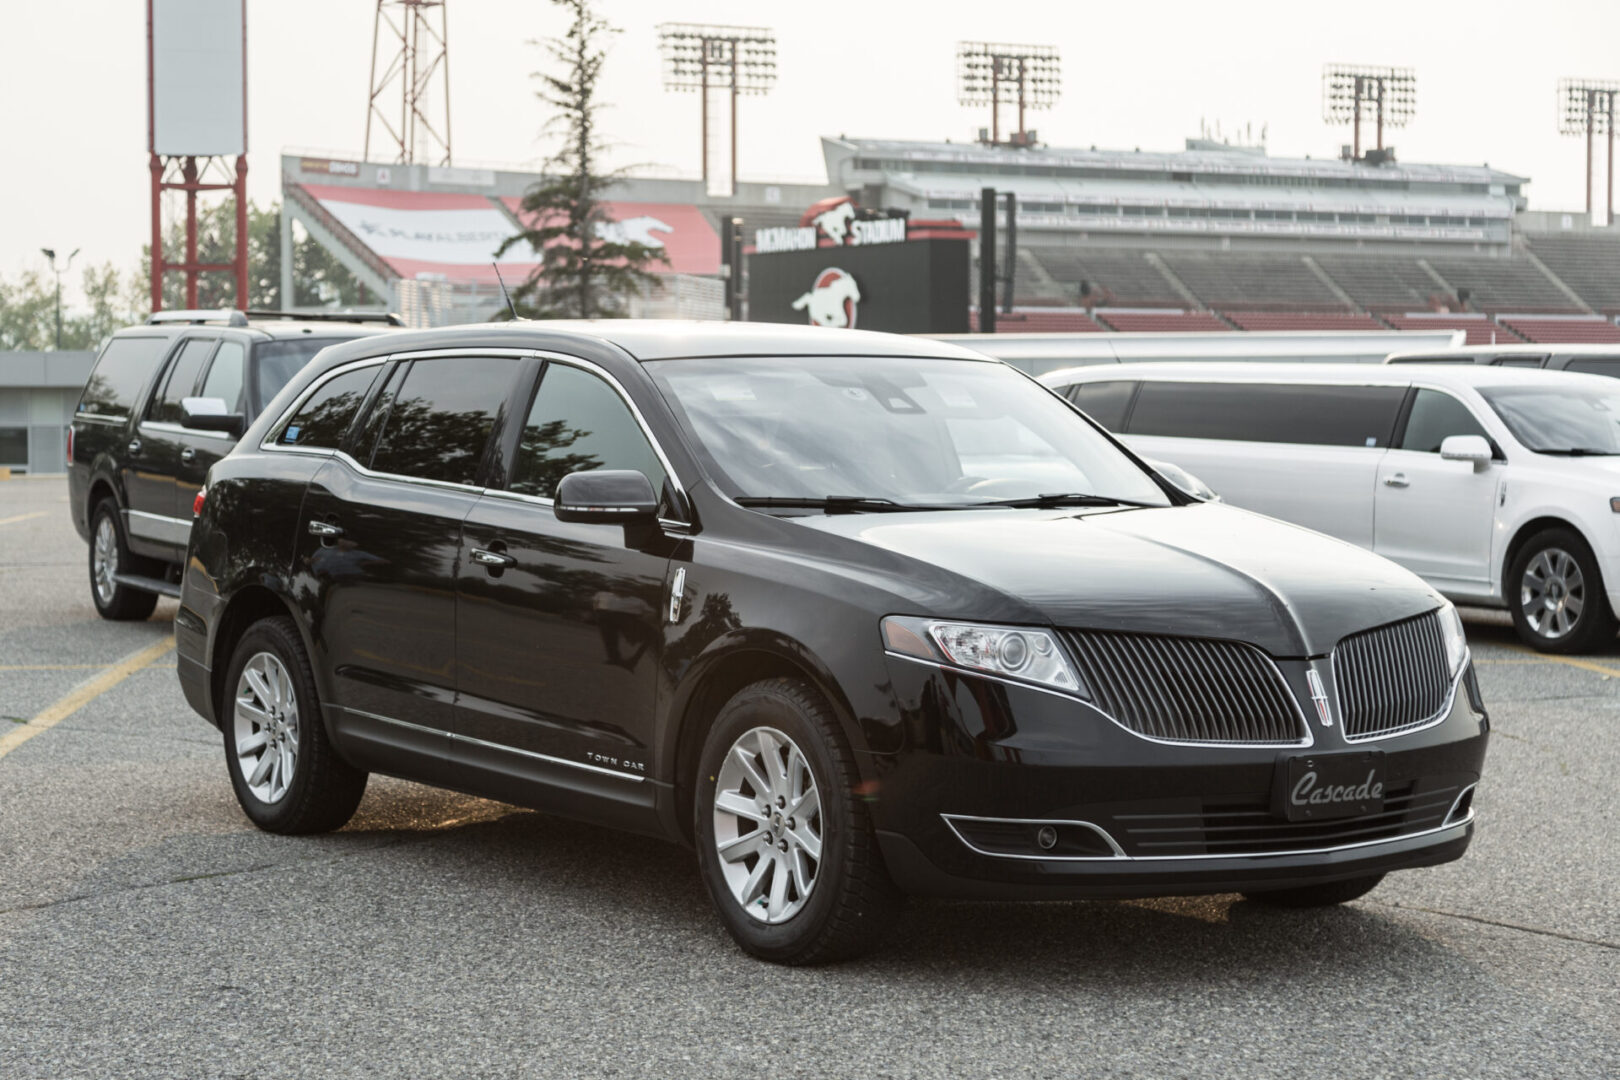 A black lincoln mkt is parked in the parking lot.